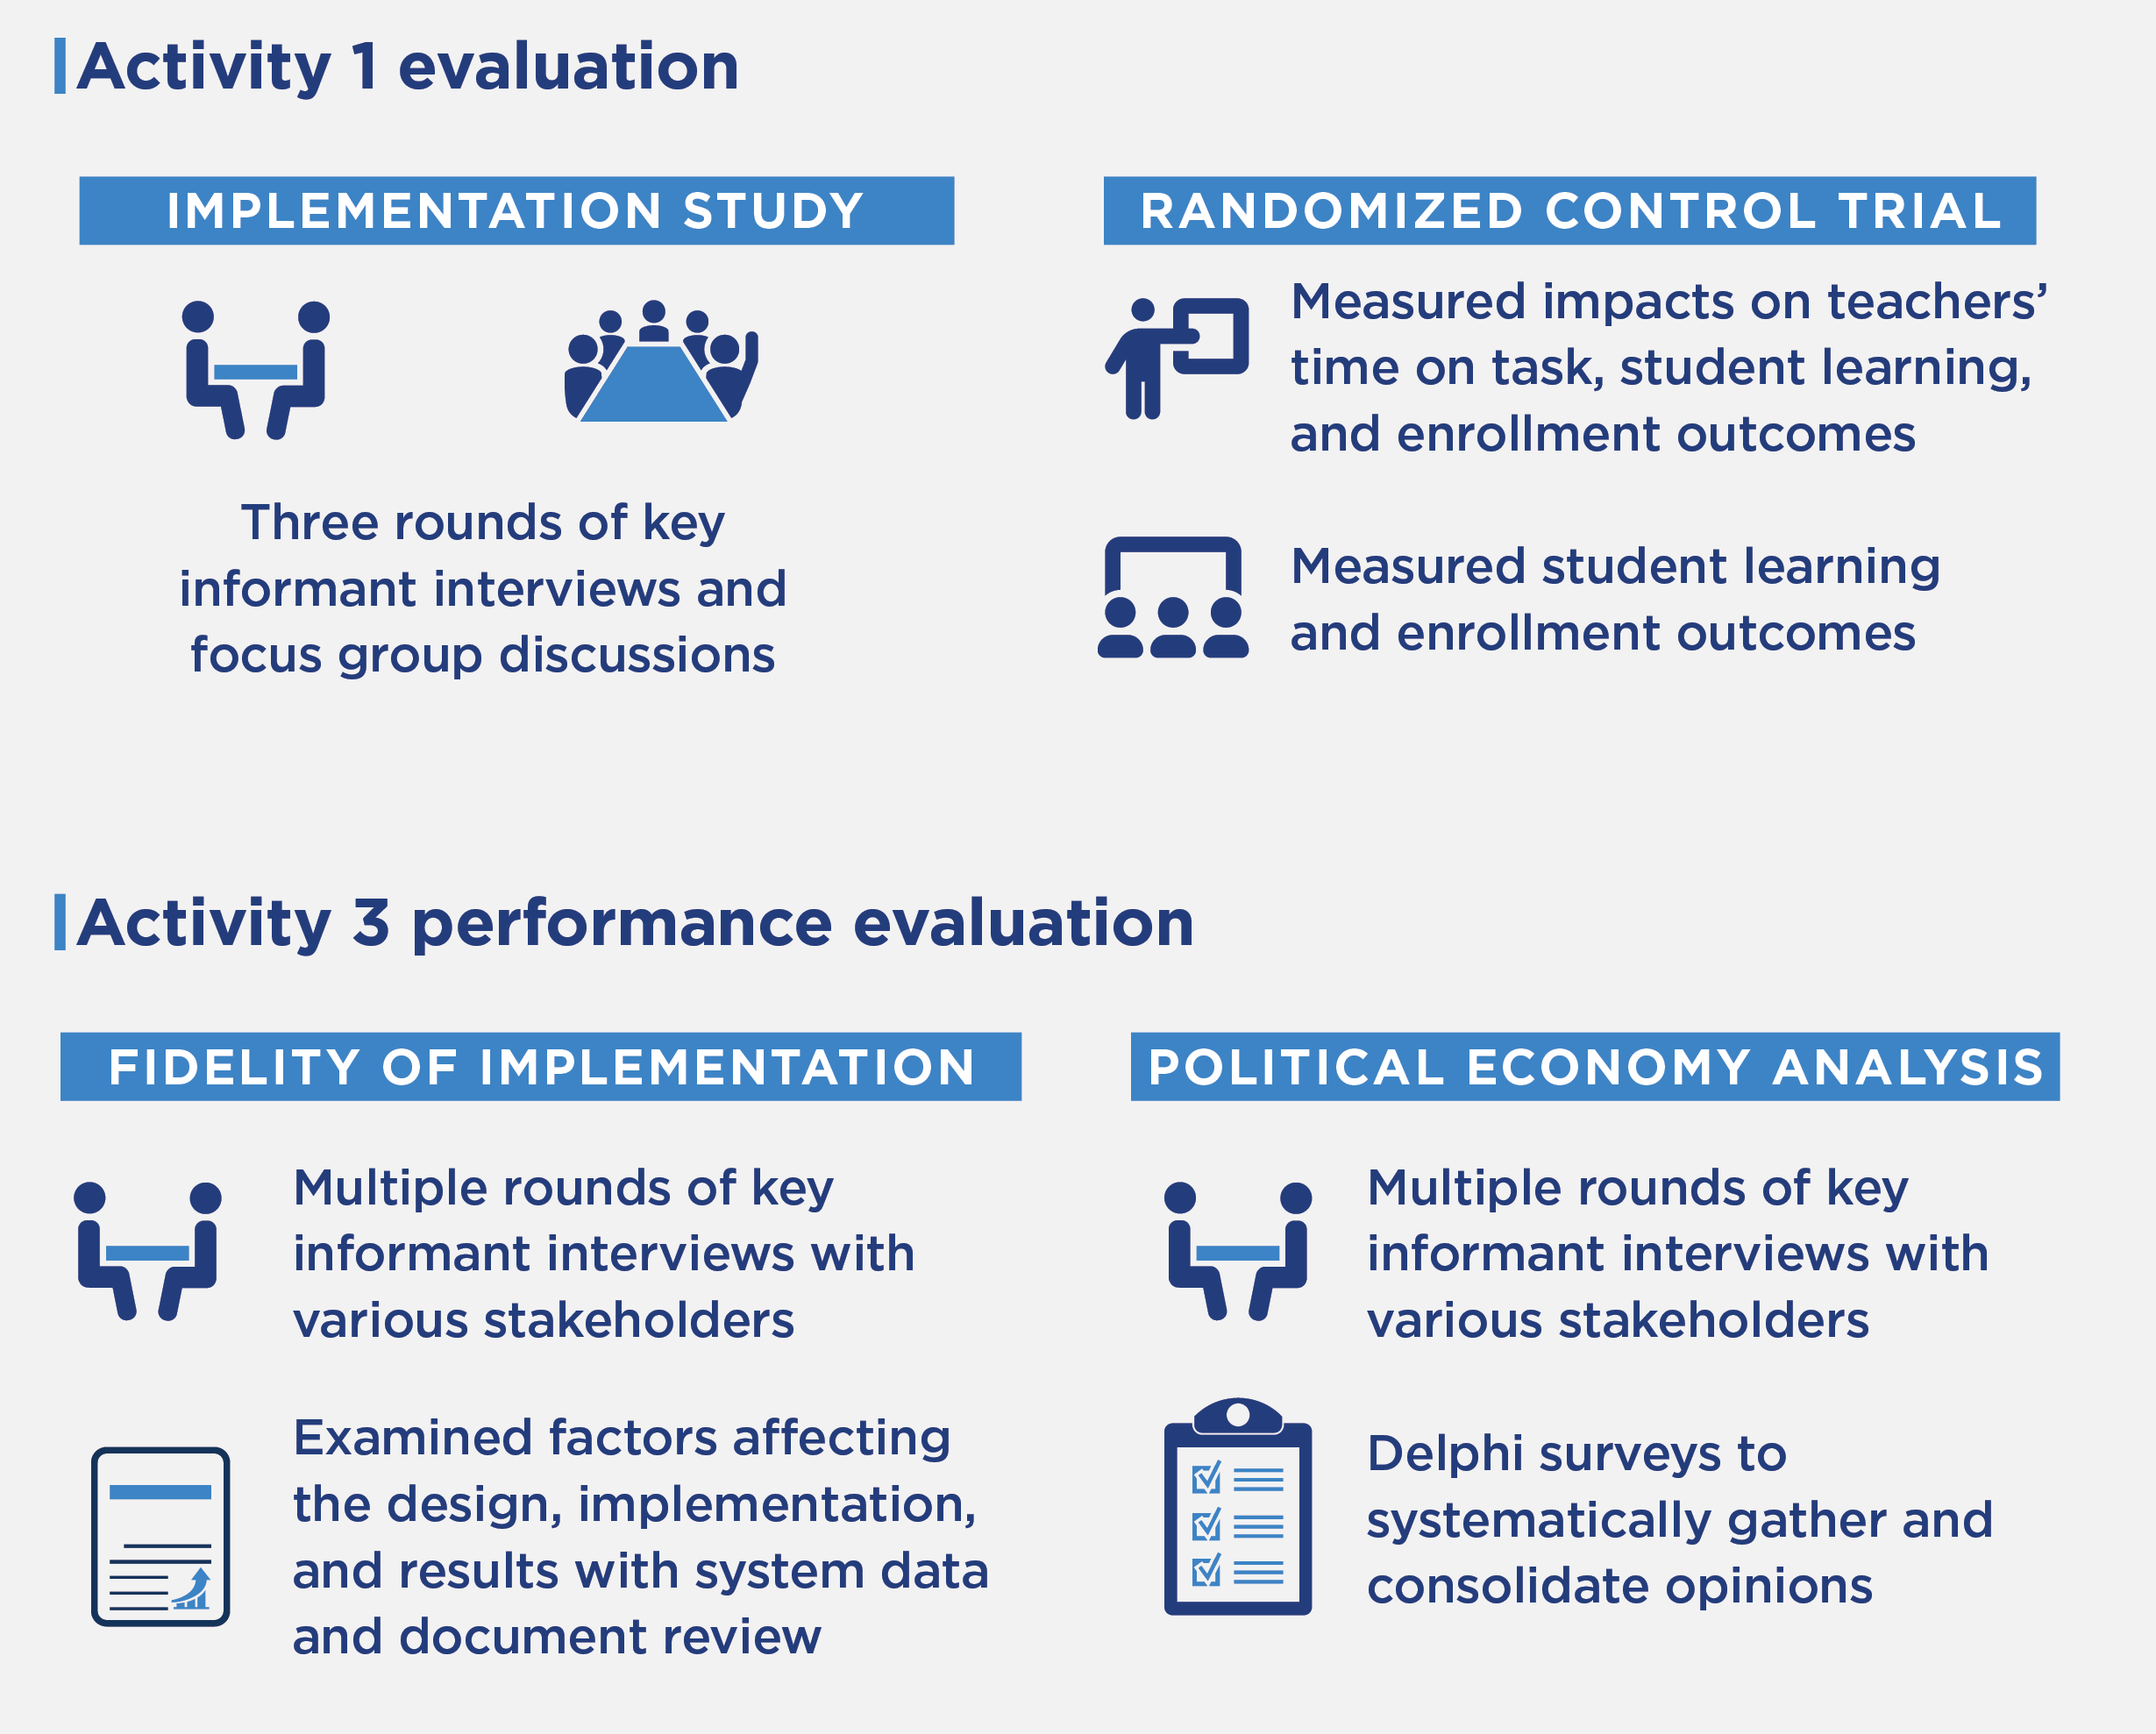 For activity 1, the implementation study had three rounds of key informant interviews and focus group discussions. The RCT measured impacts on teachers' time on task, student learning, and enrollment outcomes. It also measured student learning and enrollment outcomes. For activity 3, the fidelity of implementation evaluation used multiple rounds of key informant interviews with various stakeholders. It examined factors affecting the design, implementation, and results with system data and document review. The PEA had multiple rounds of key informant interviews with various stakeholders. It also had Delphi surveys to systematically gather and consolidate opinions.